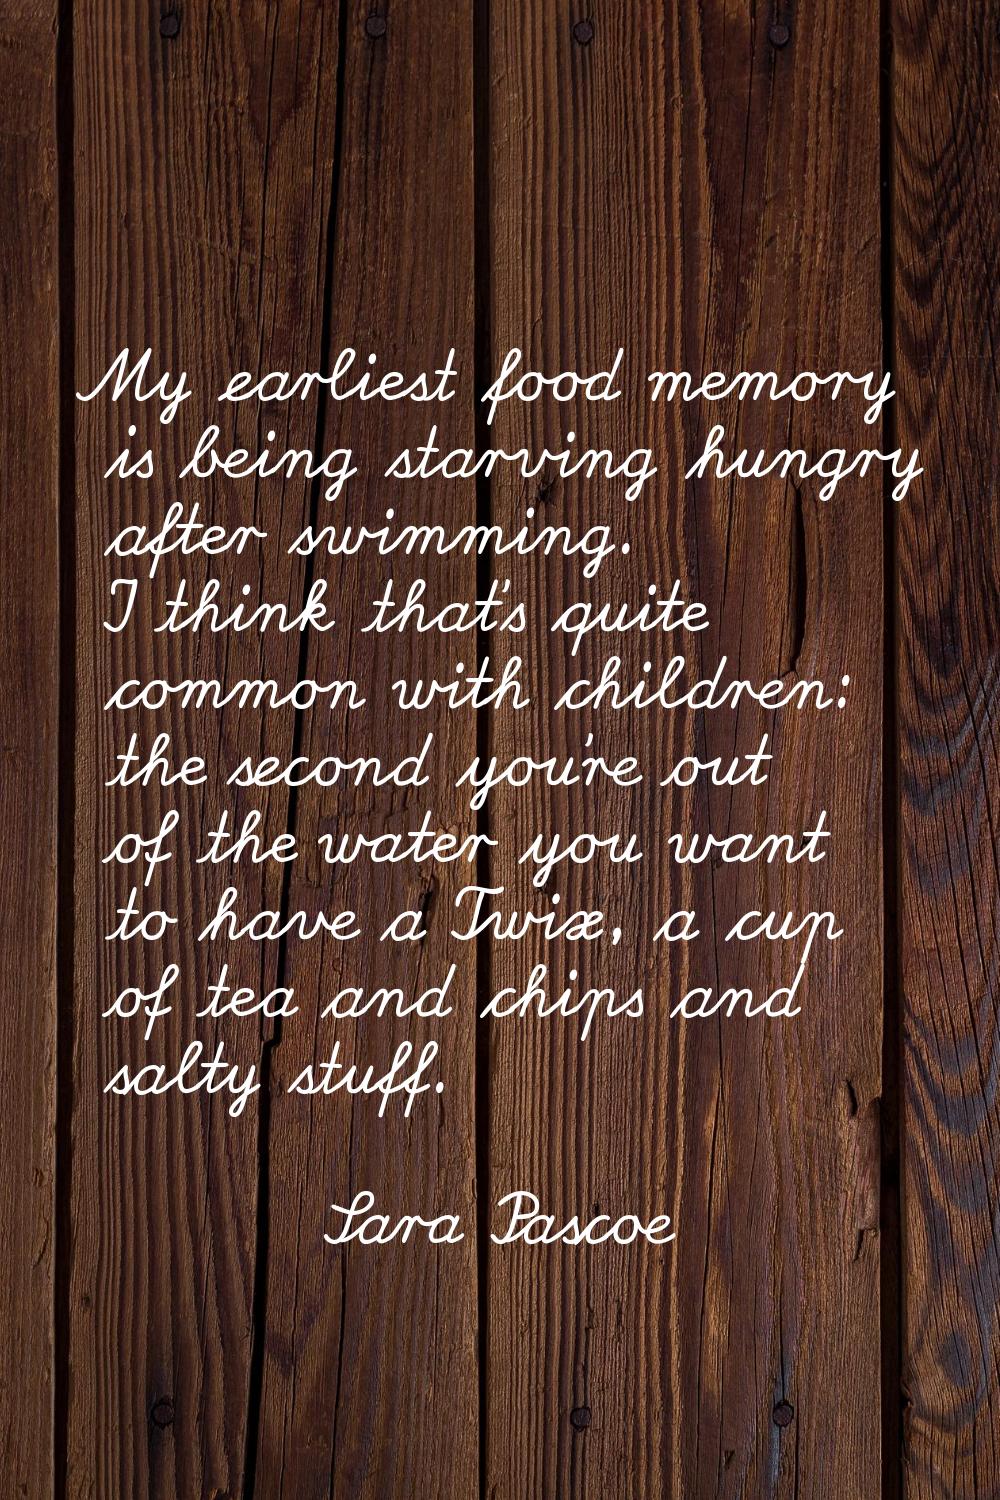 My earliest food memory is being starving hungry after swimming. I think that's quite common with c